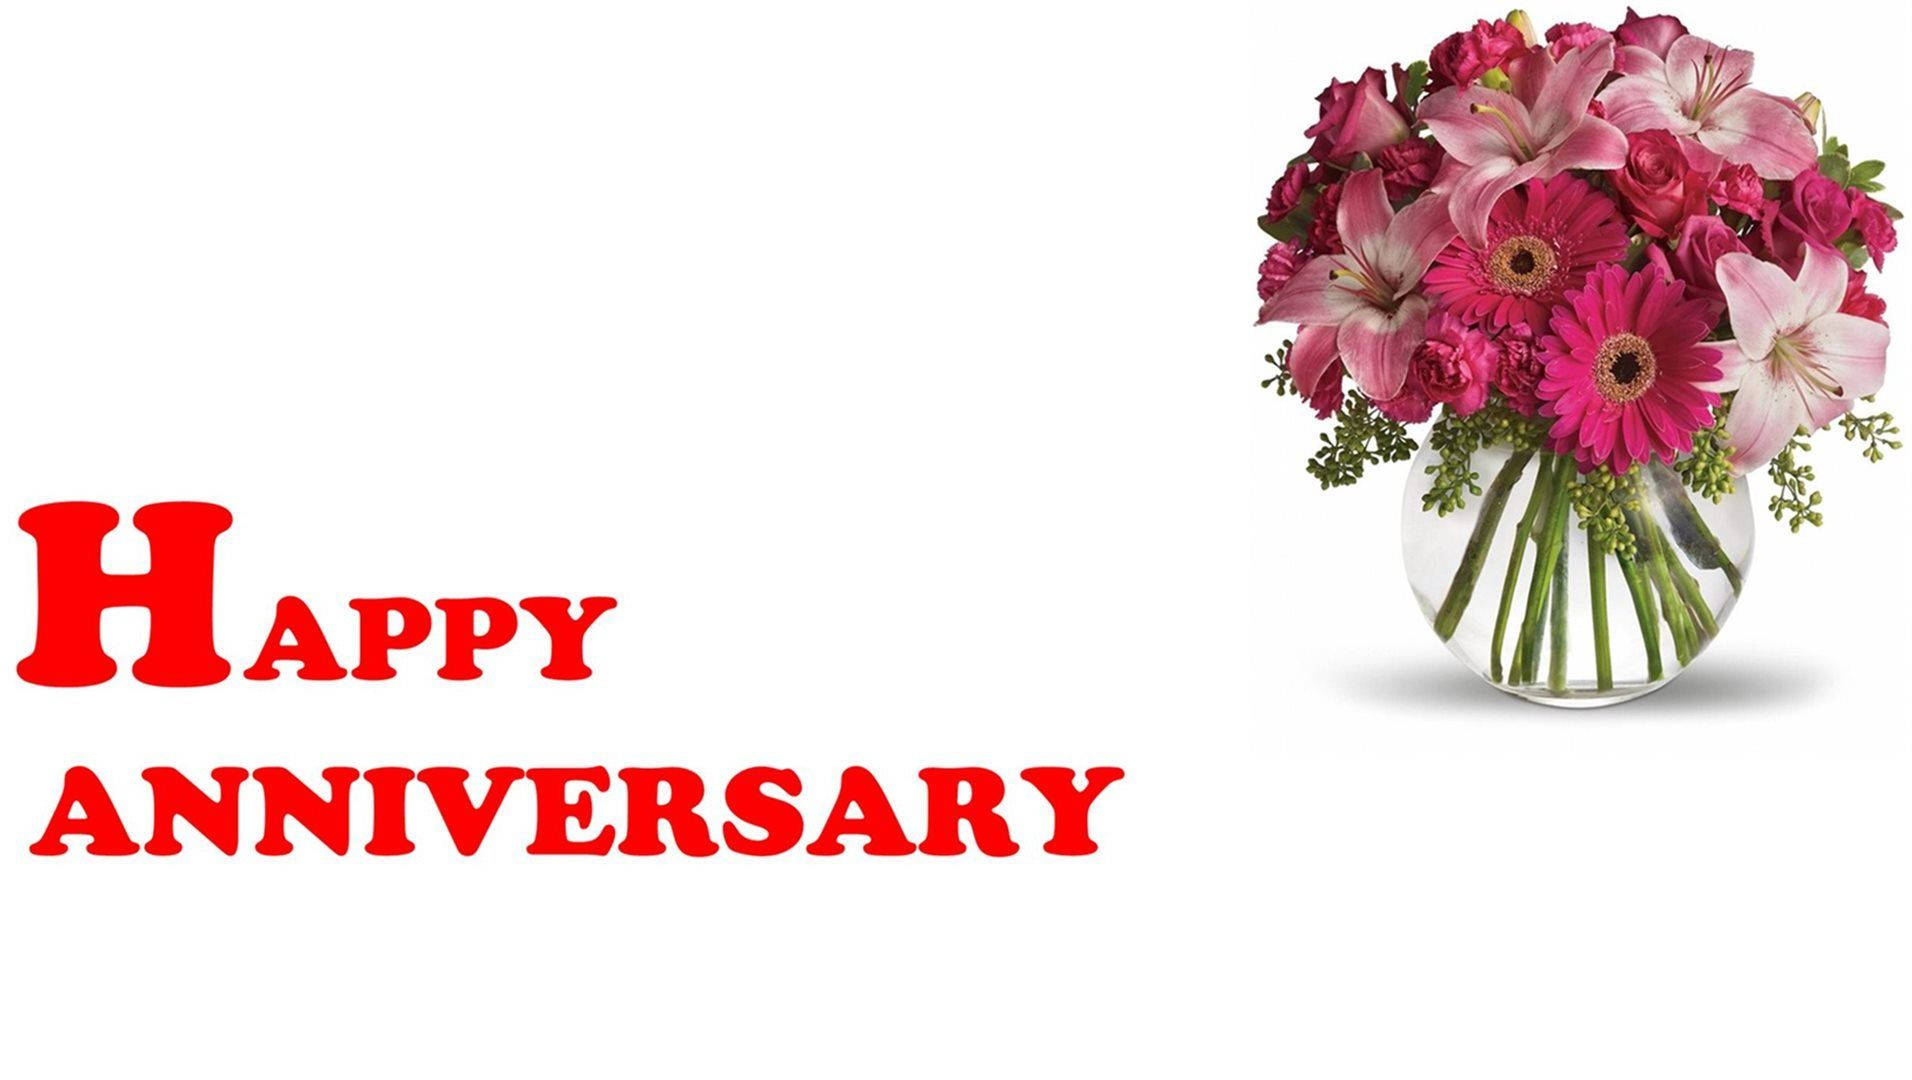 Happy Anniversary Flowers In Glass Vase Background